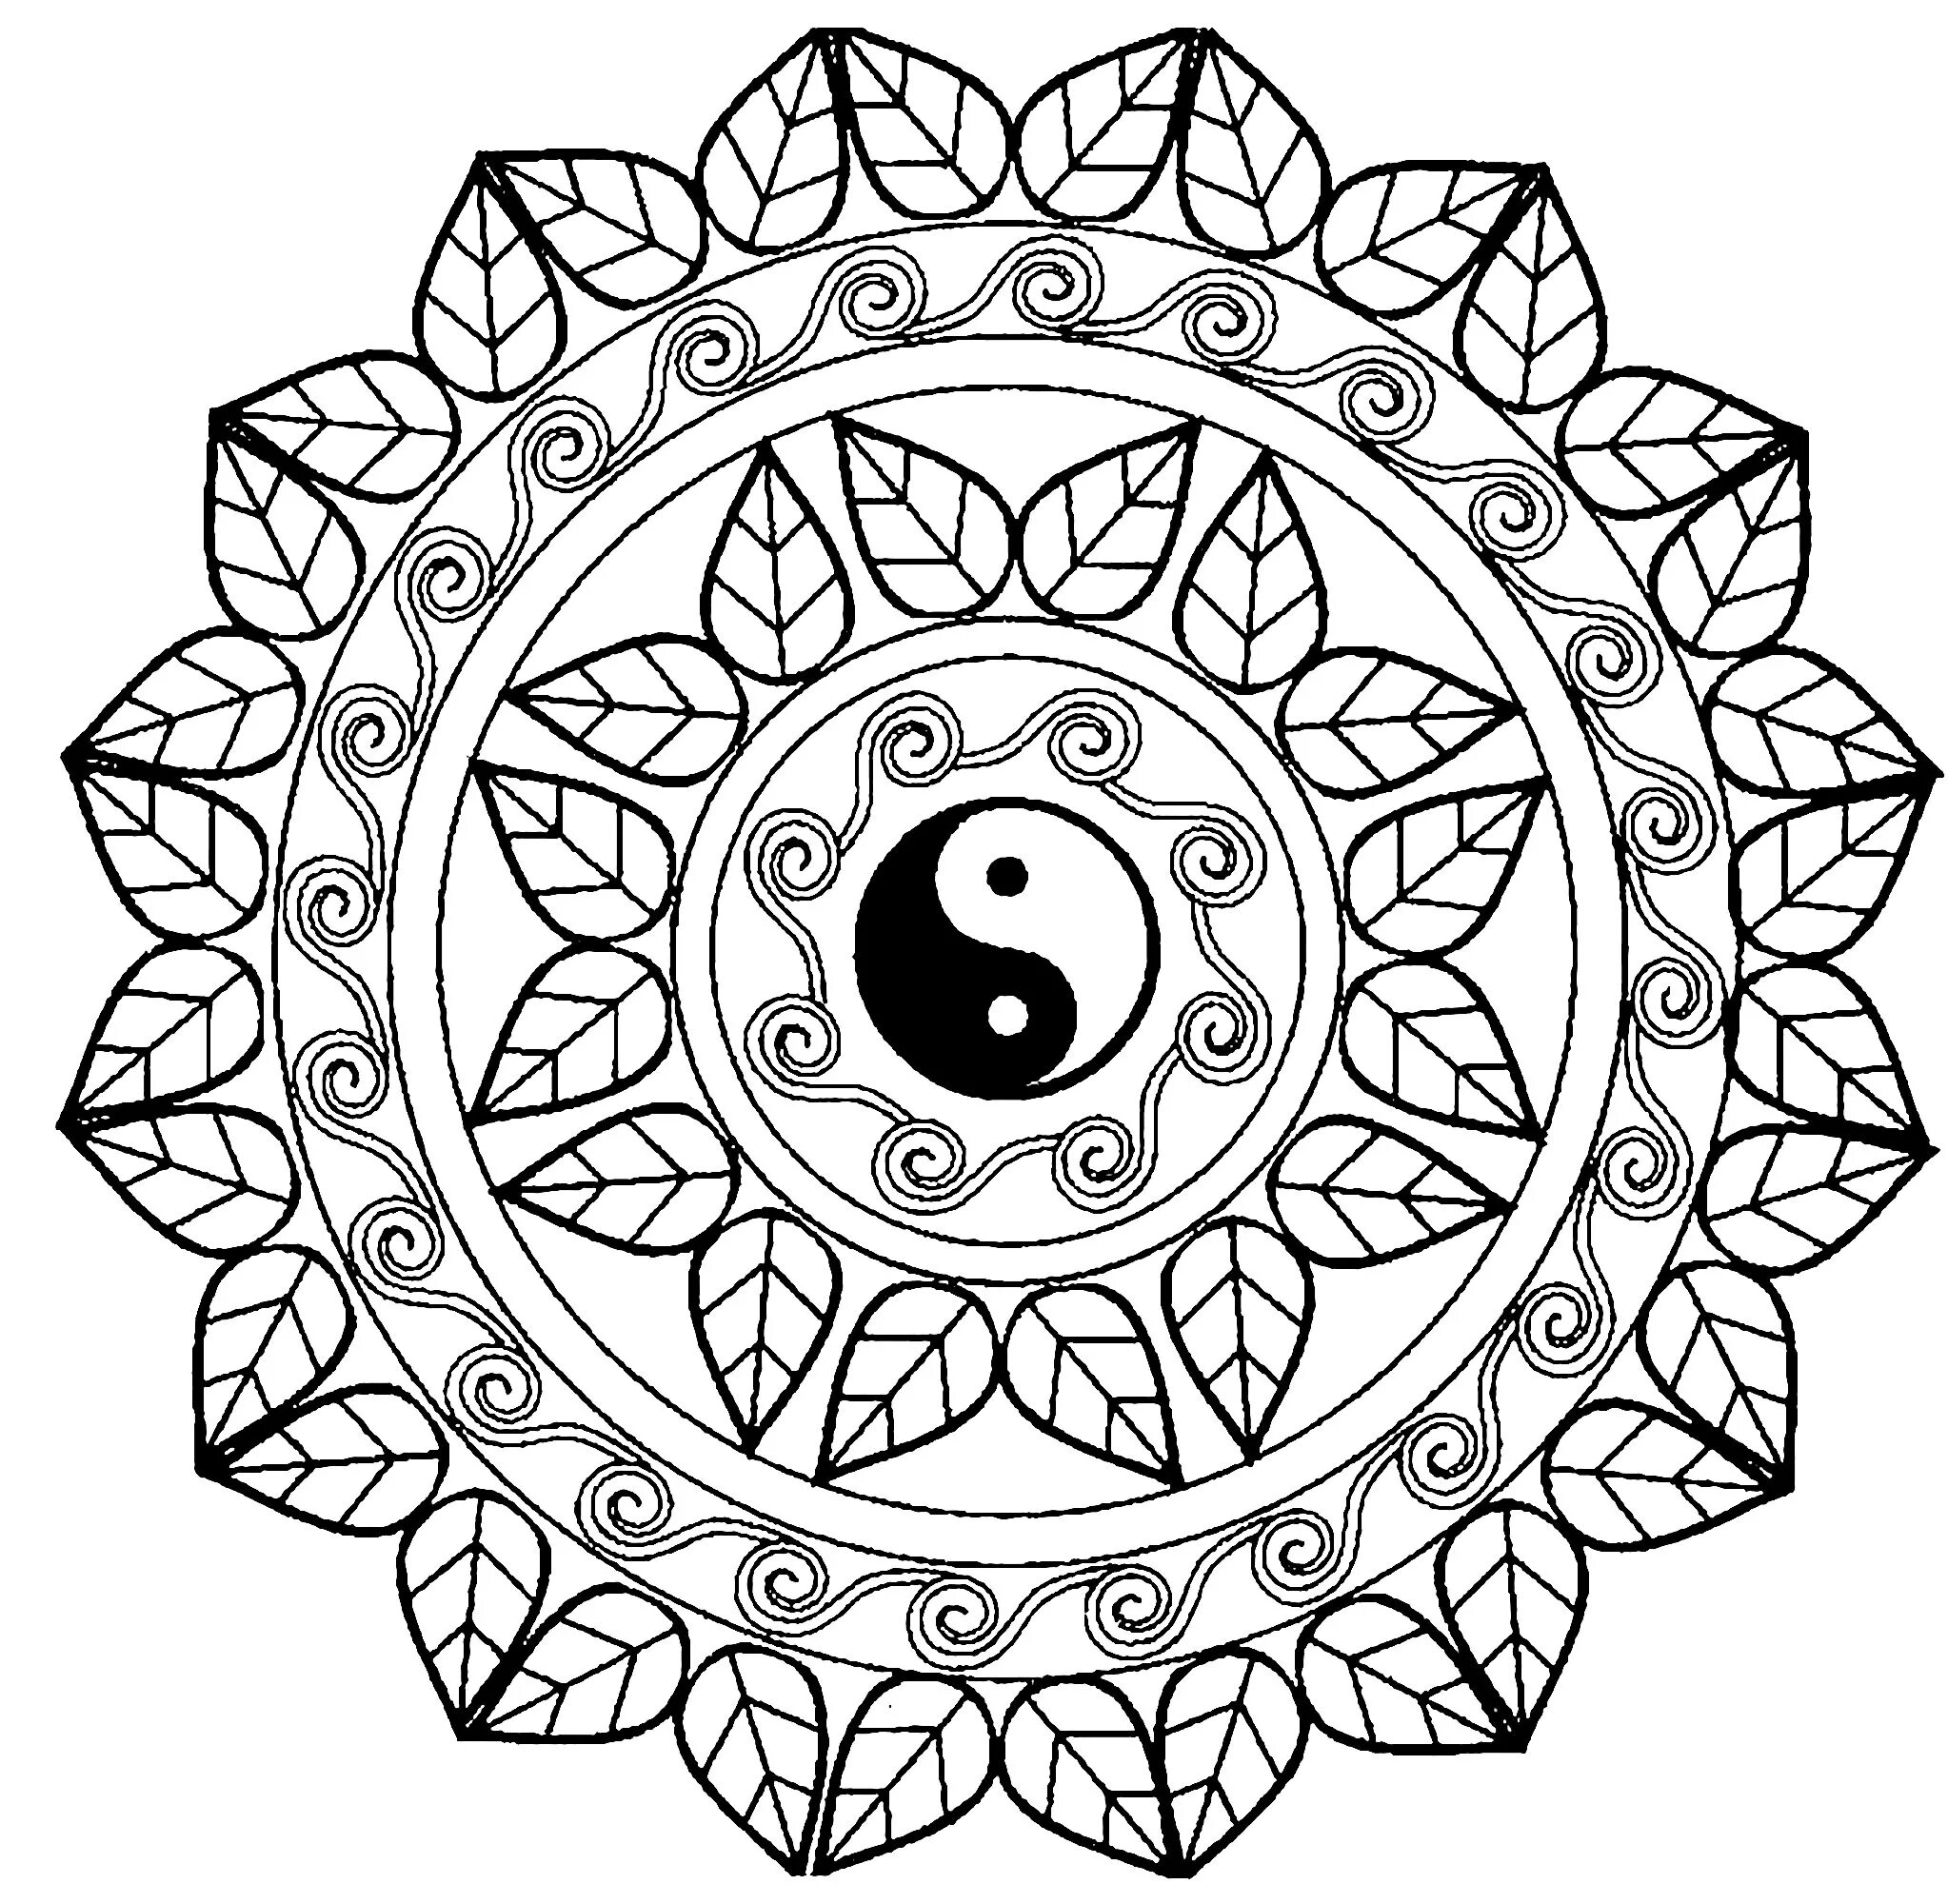 Innovative mantra coloring pages